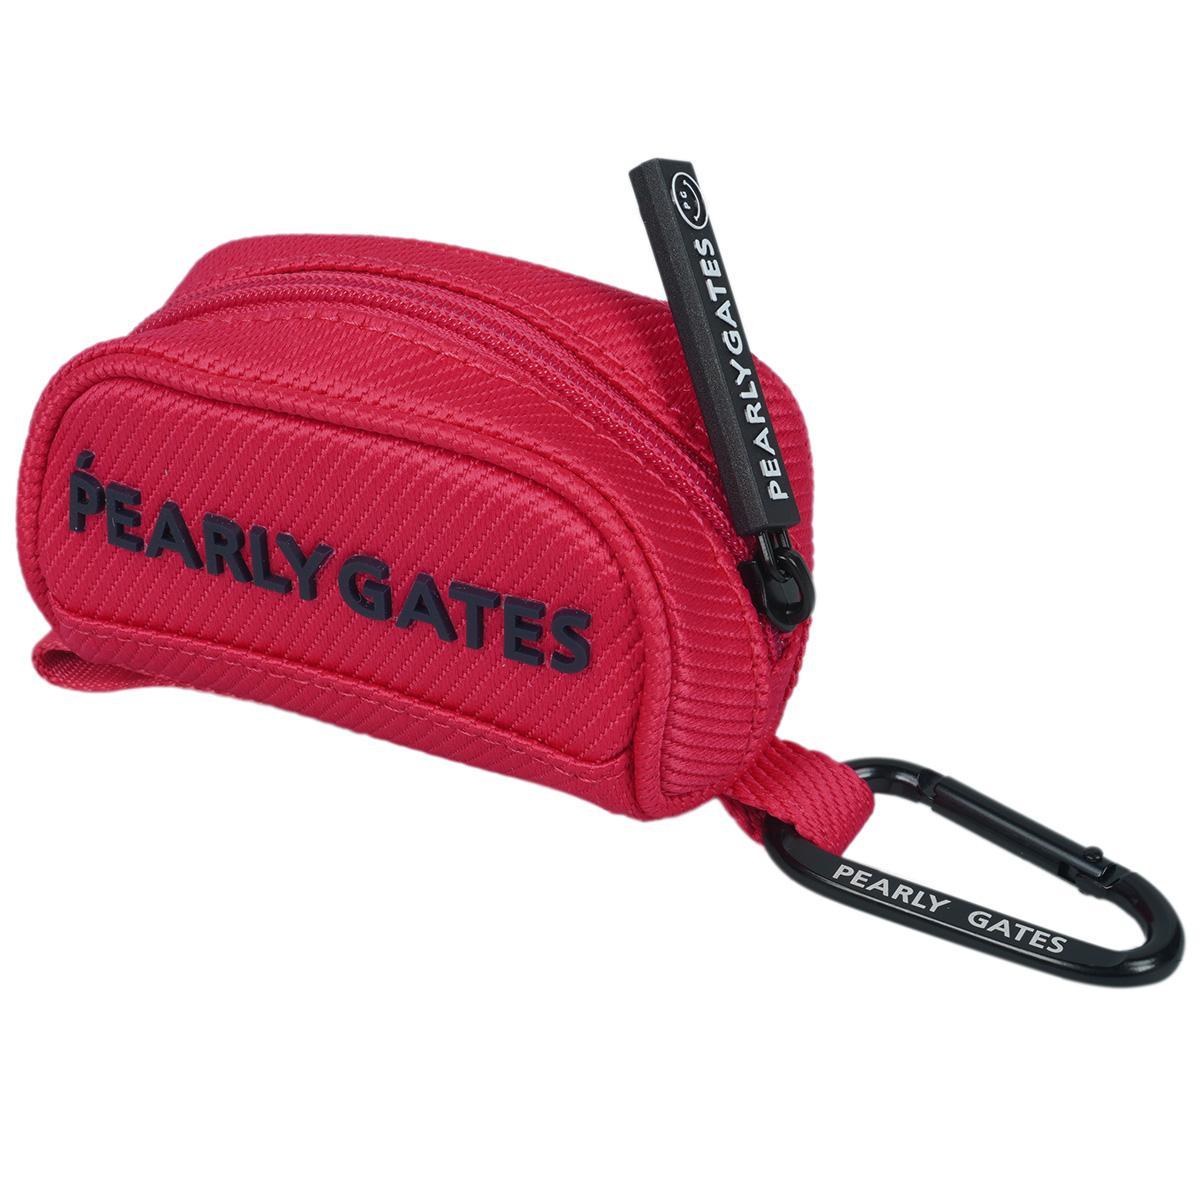  Pearly Gates PEARLY GATES ball case 